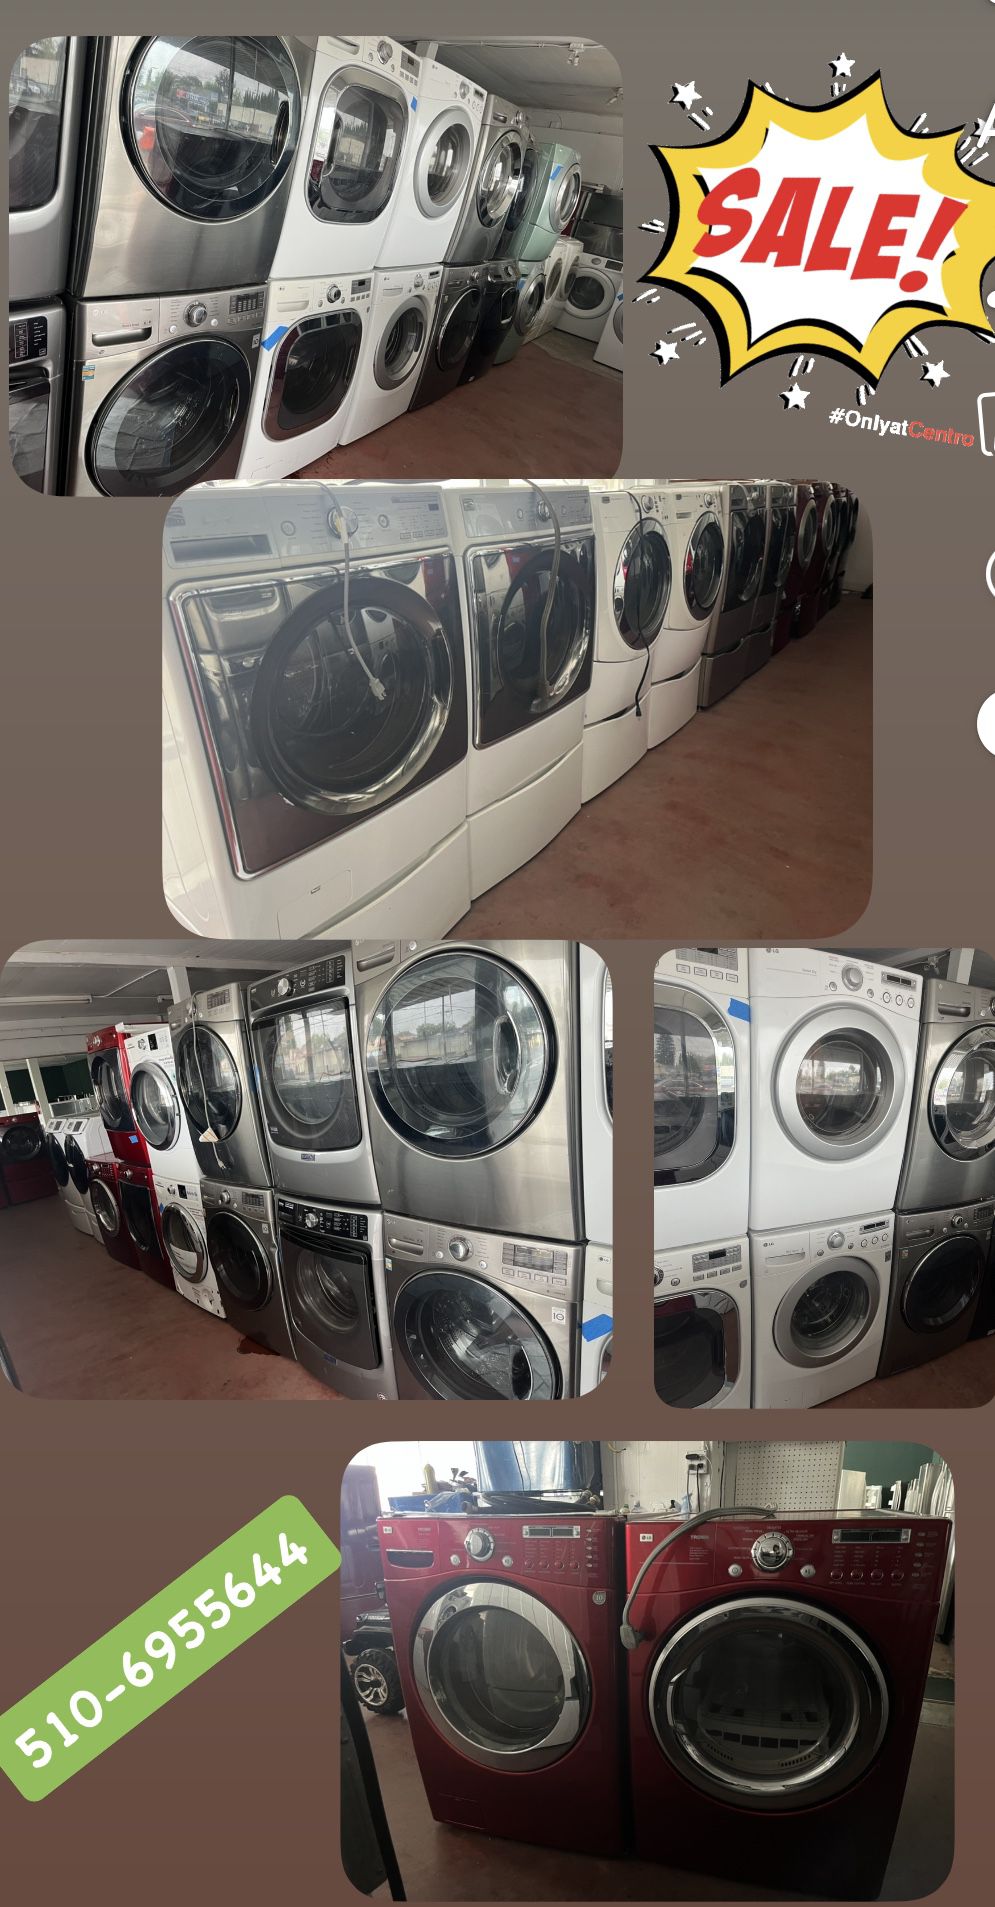 Washer And Dryer Set Used 